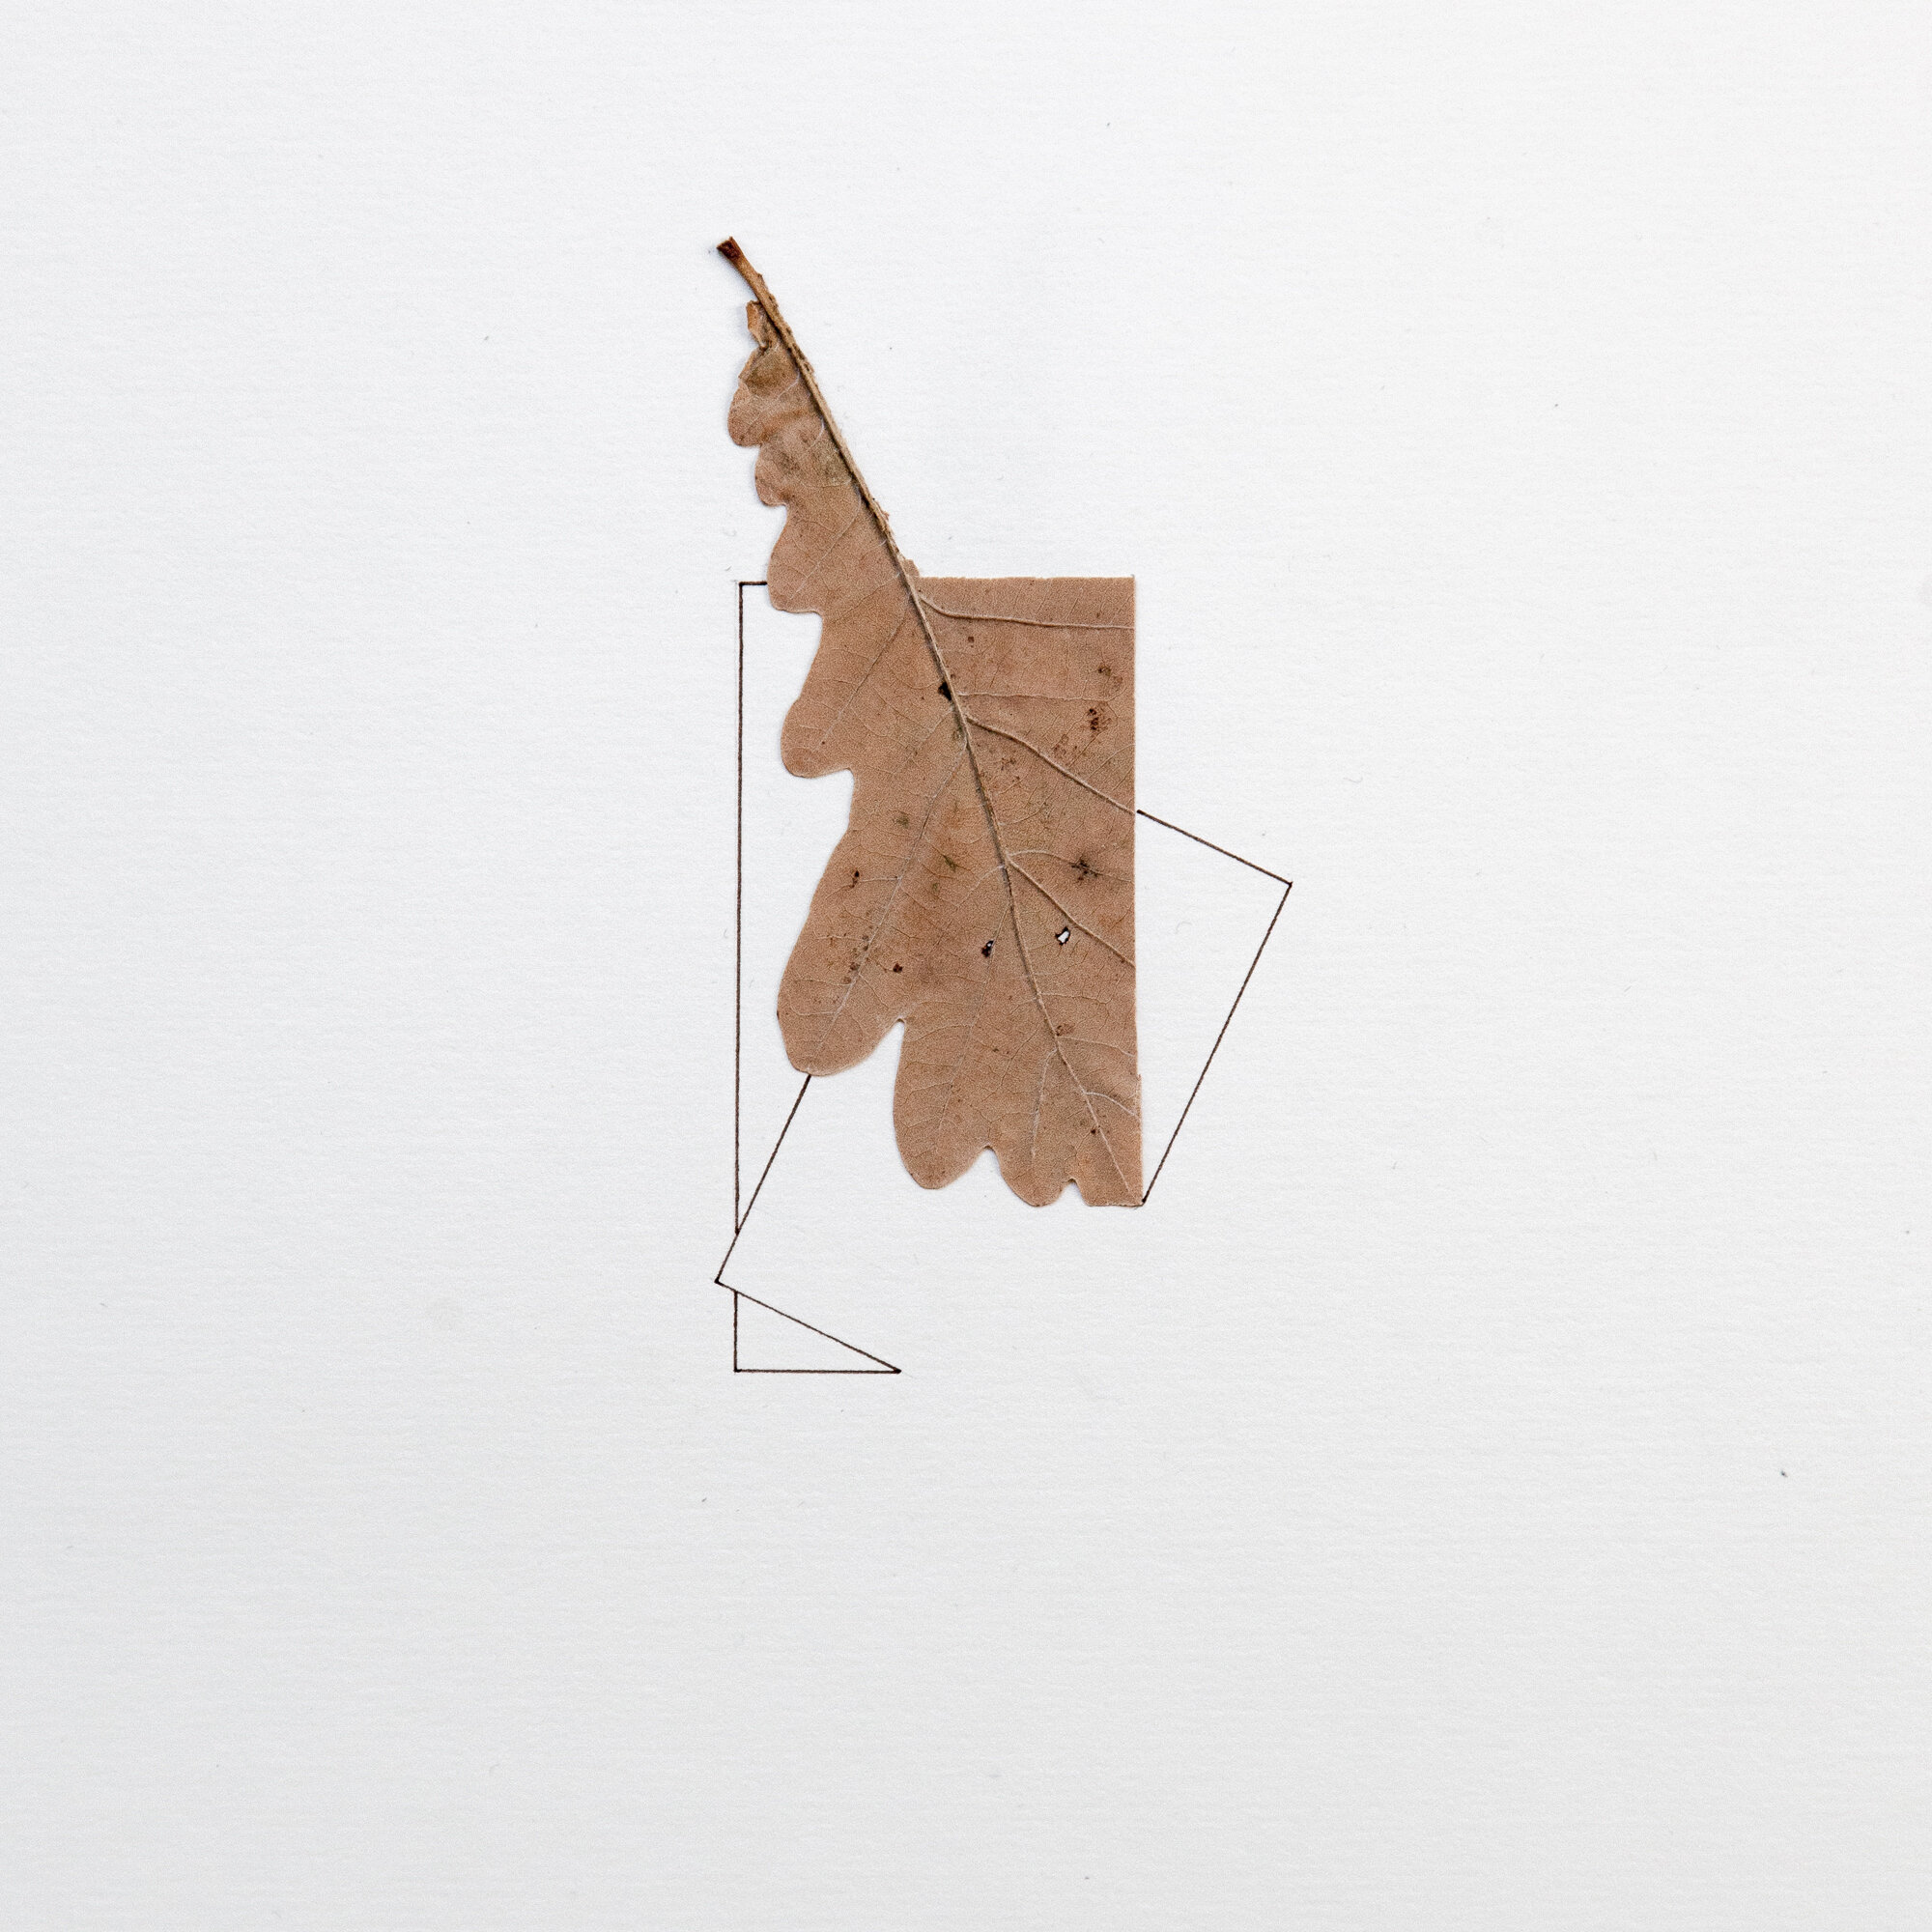   UNTITLED   48x36cm | collage, dried leaves and marker on paper    2015 